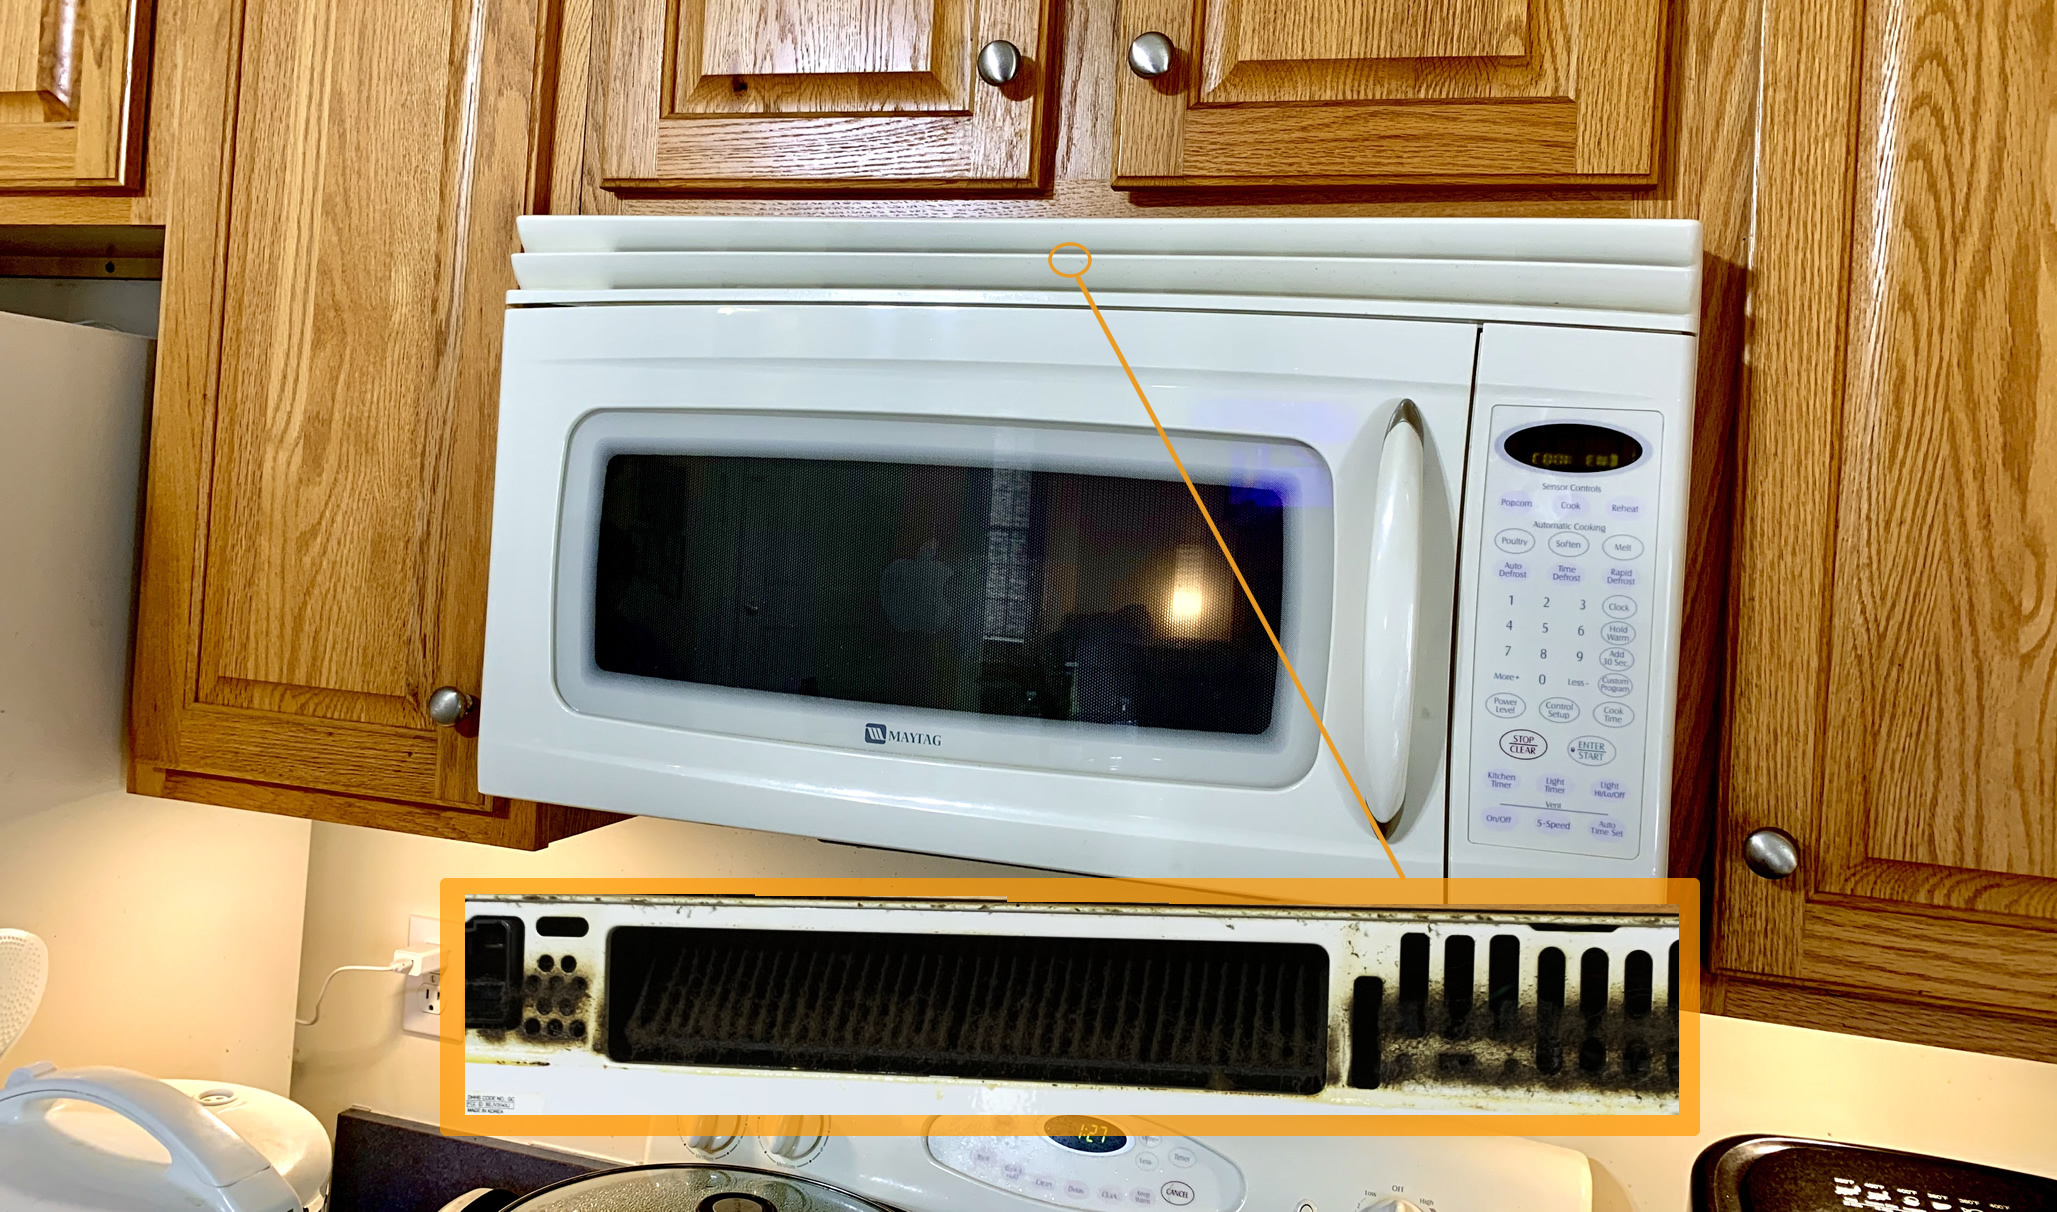 Microwave With Exhaust Fan Might Have An Additional Top Air with dimensions 2057 X 1212